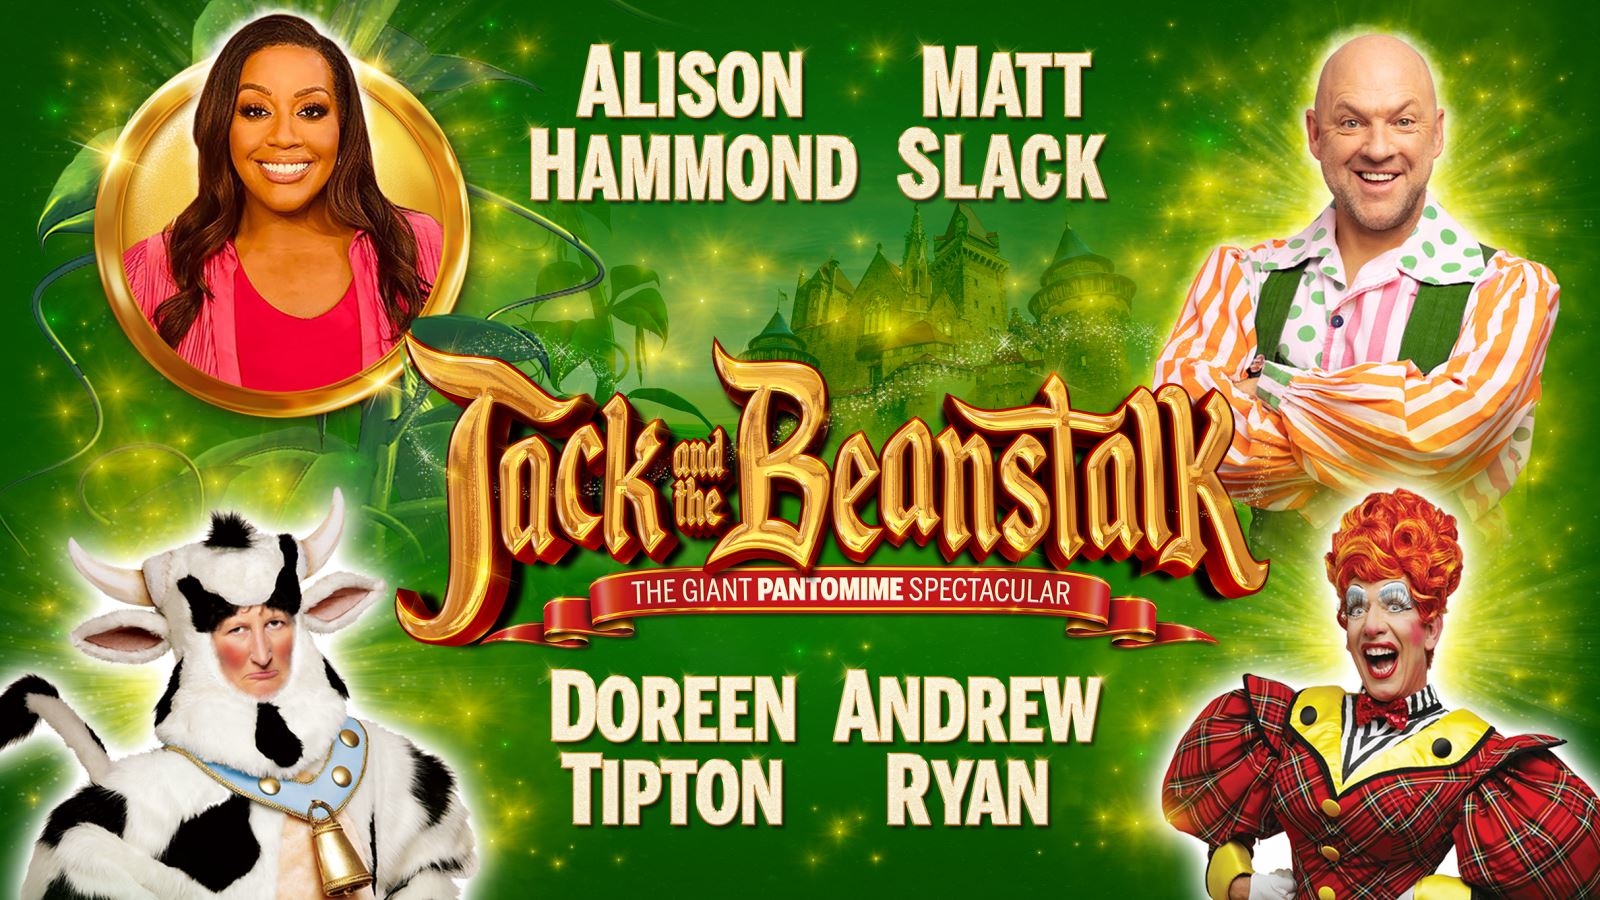 Jack and the beanstalk pantomime poster starring Alison Hammond